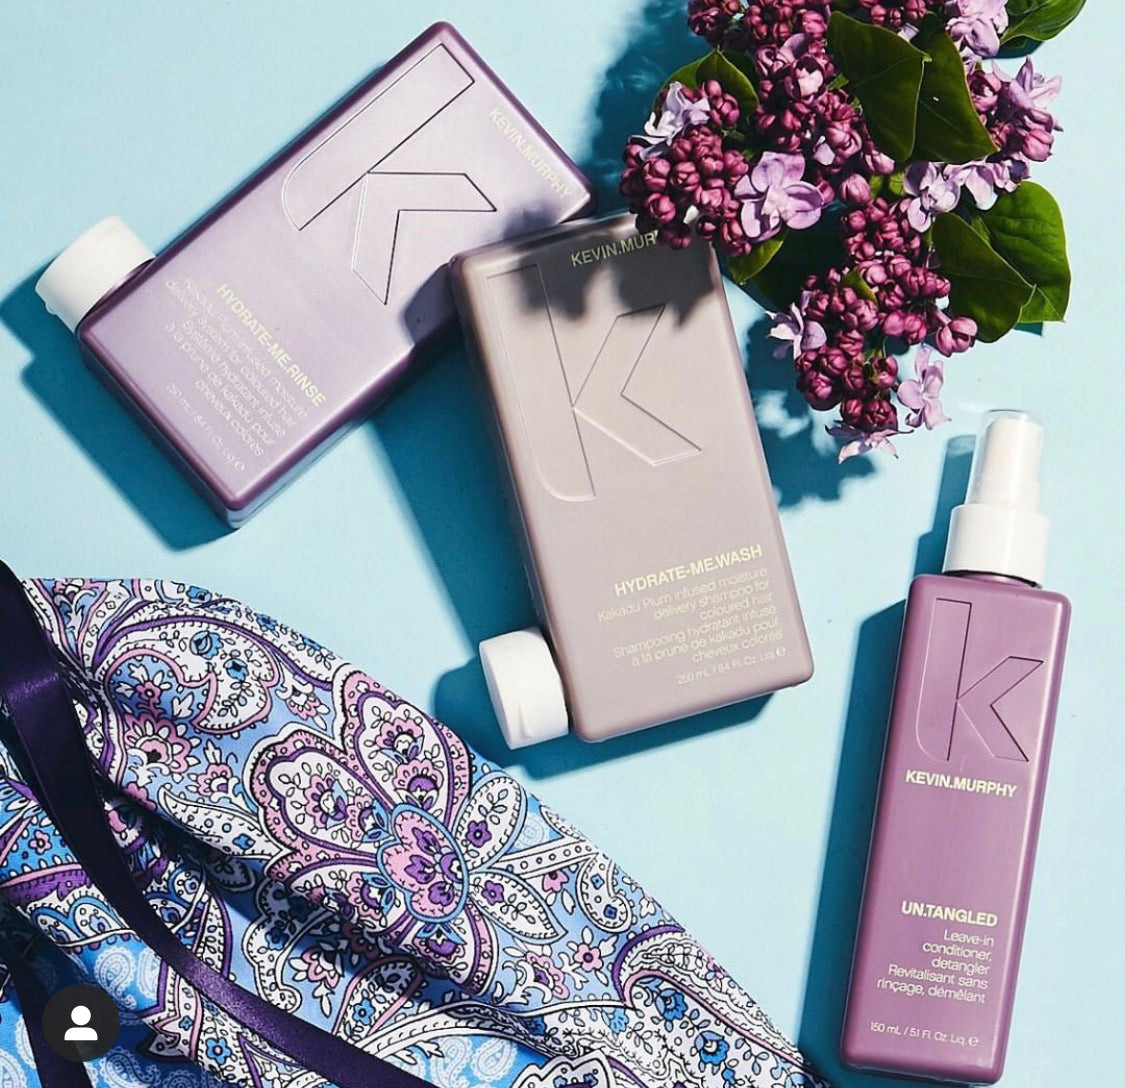 KEVIN.MURPHY - HYDRATE-ME.WASH